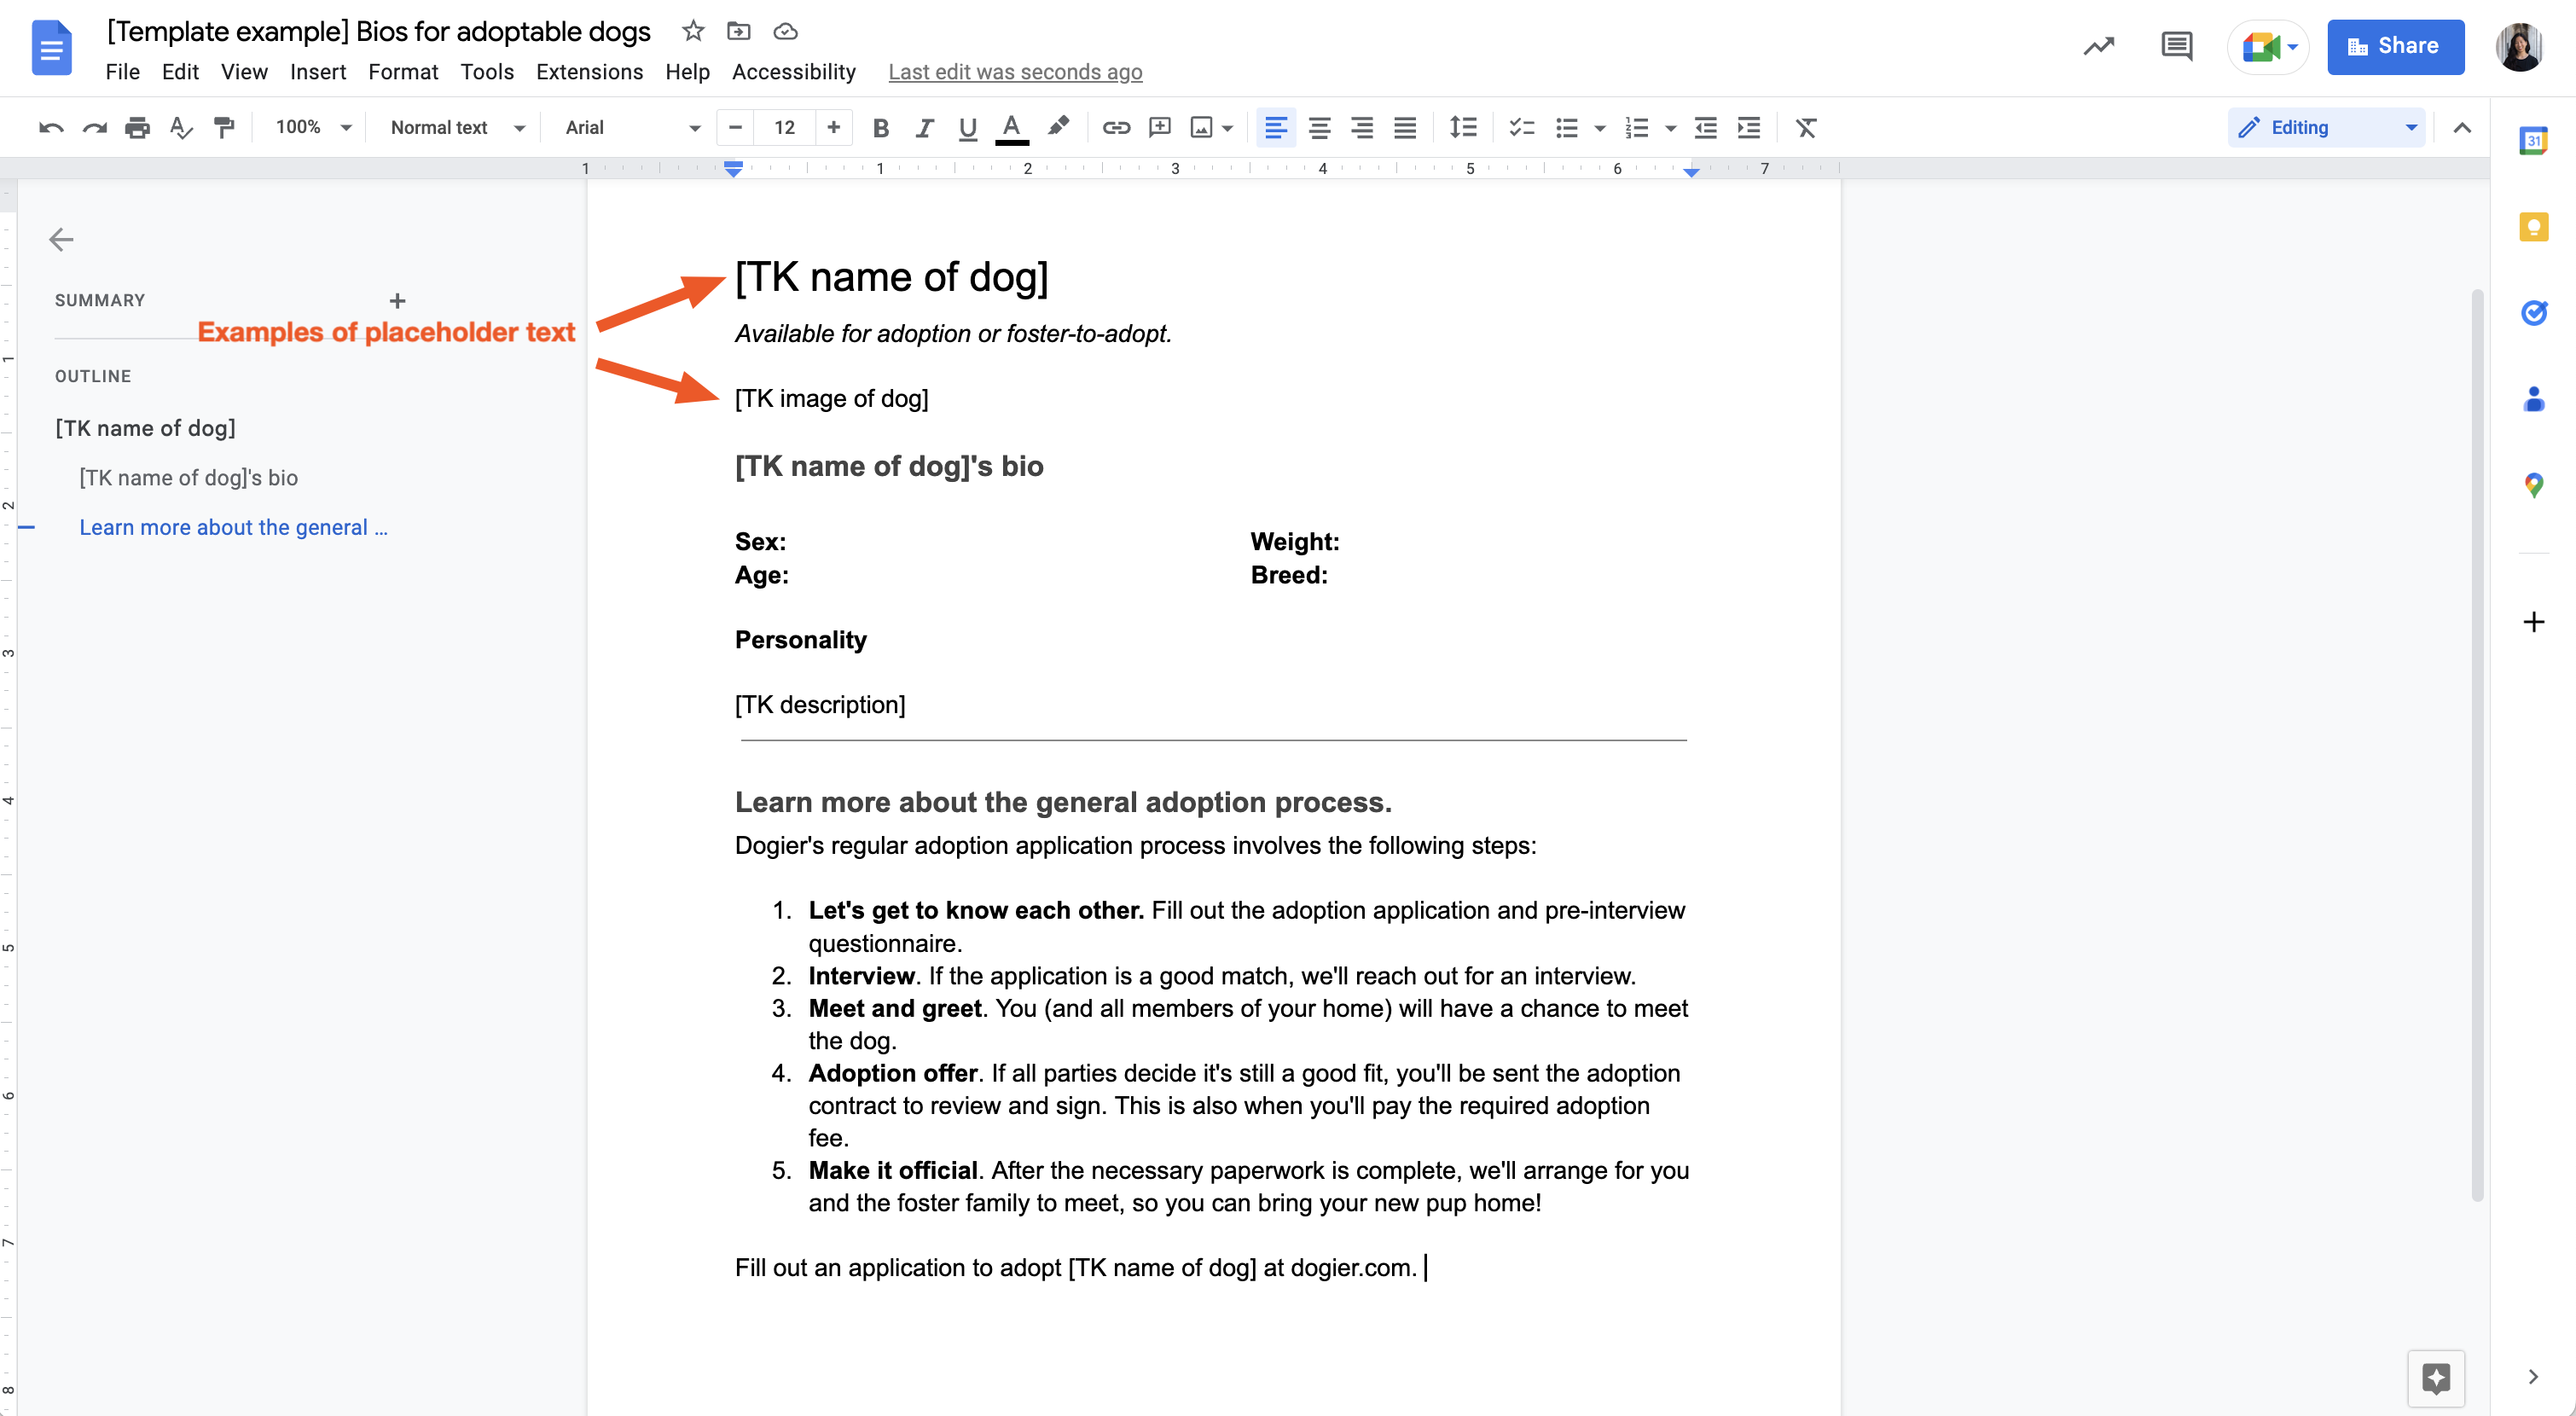 Why can't I make a template in Google Docs?